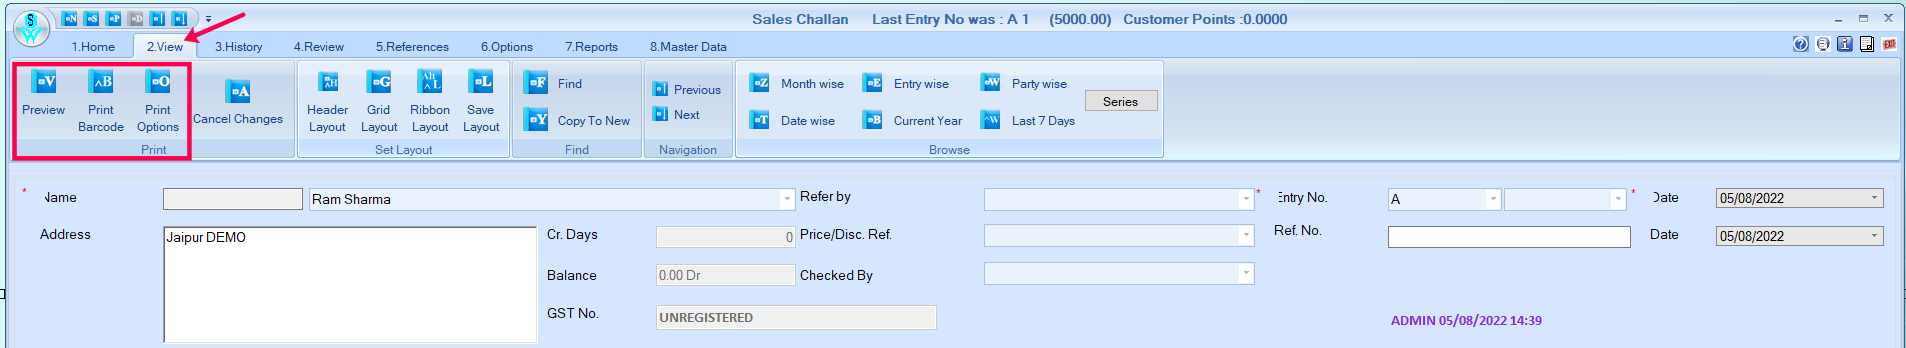 Print and preview sales challan.